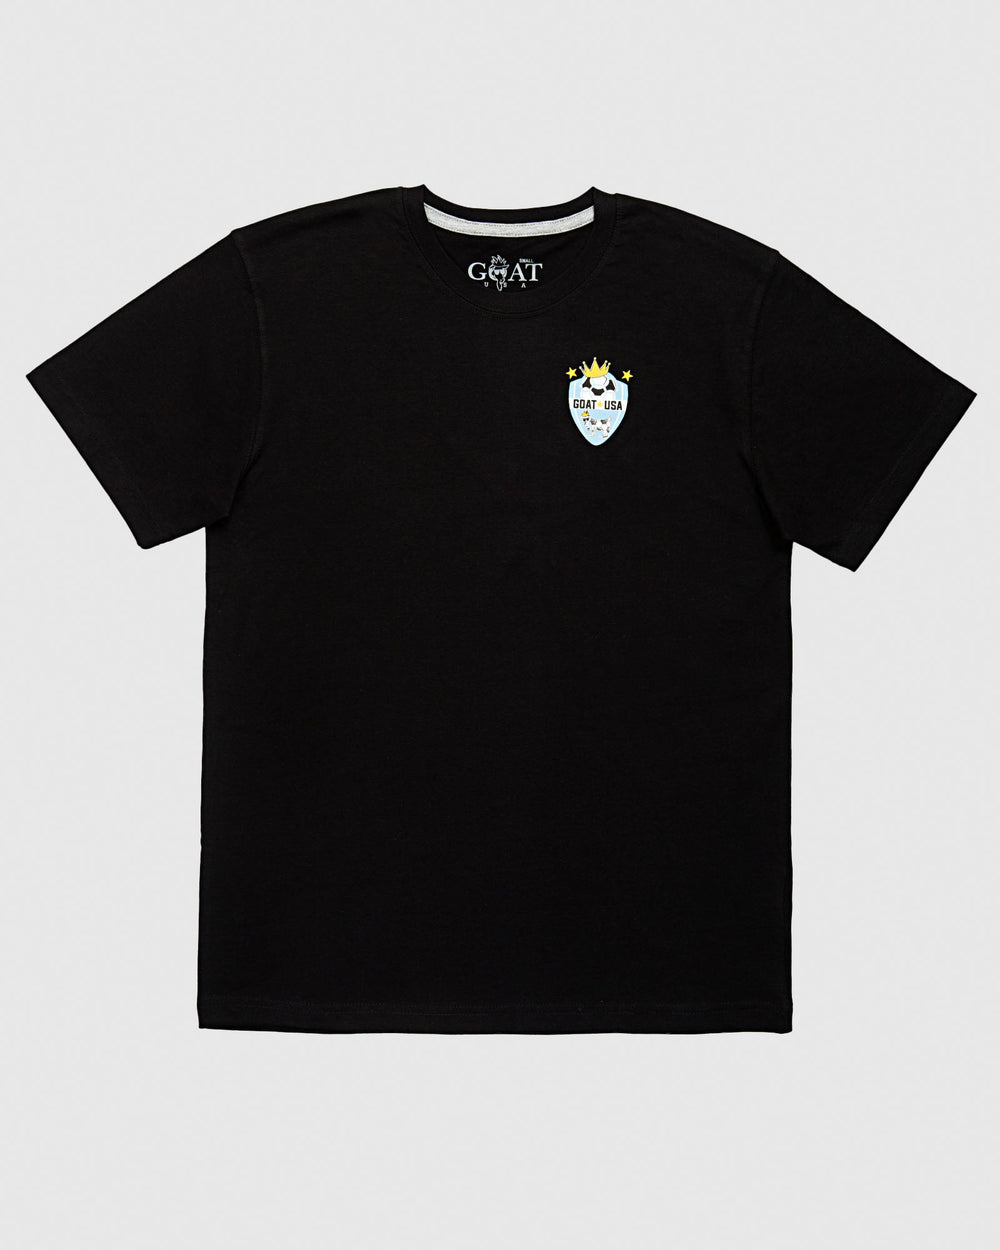 Front of black t-shirt with GOAT USA soccer design